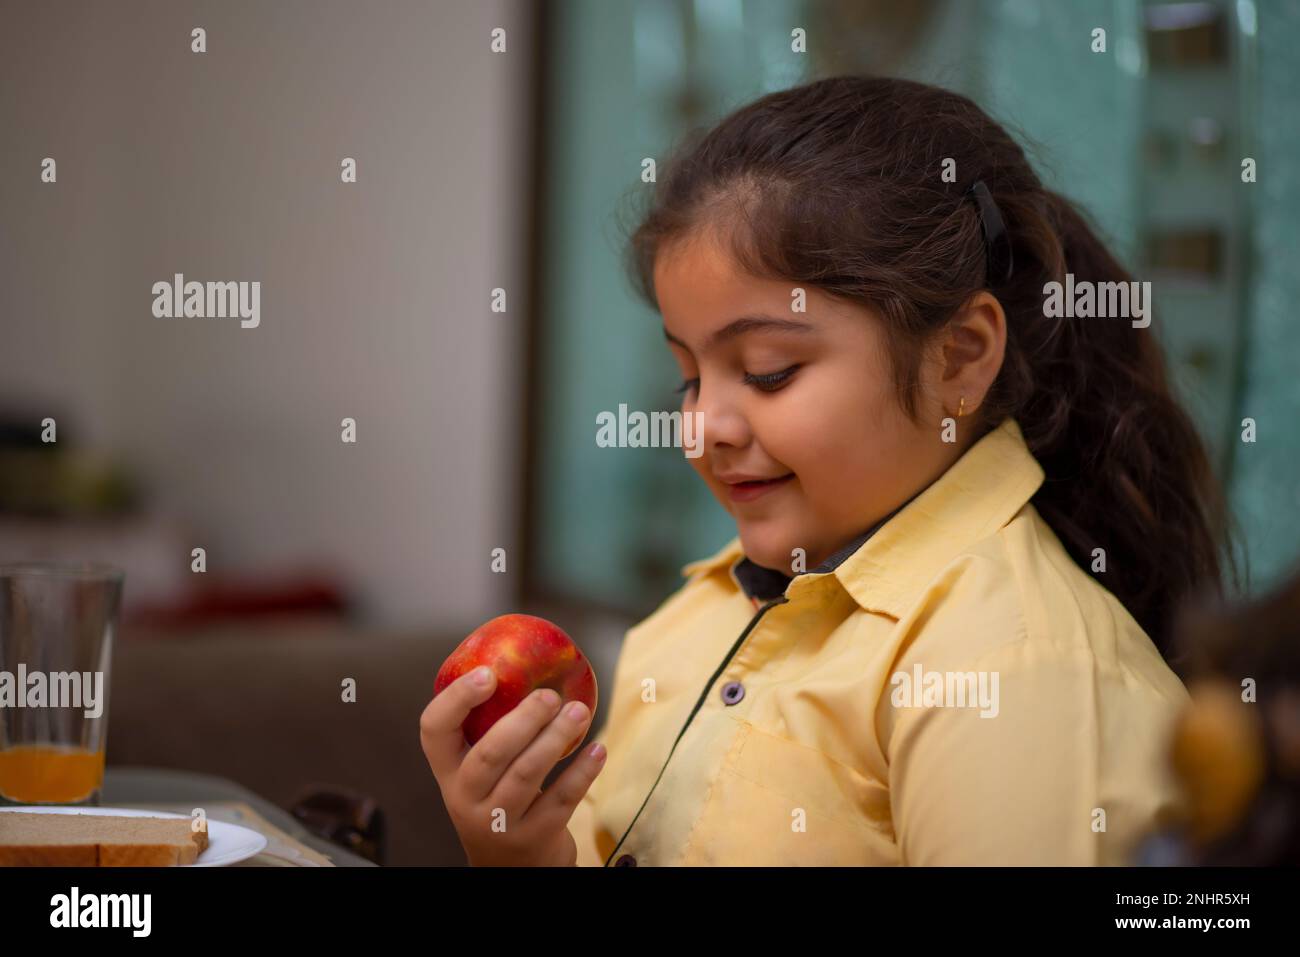 Close-up portrait of little girl while eating apple during breakfast at home Stock Photo